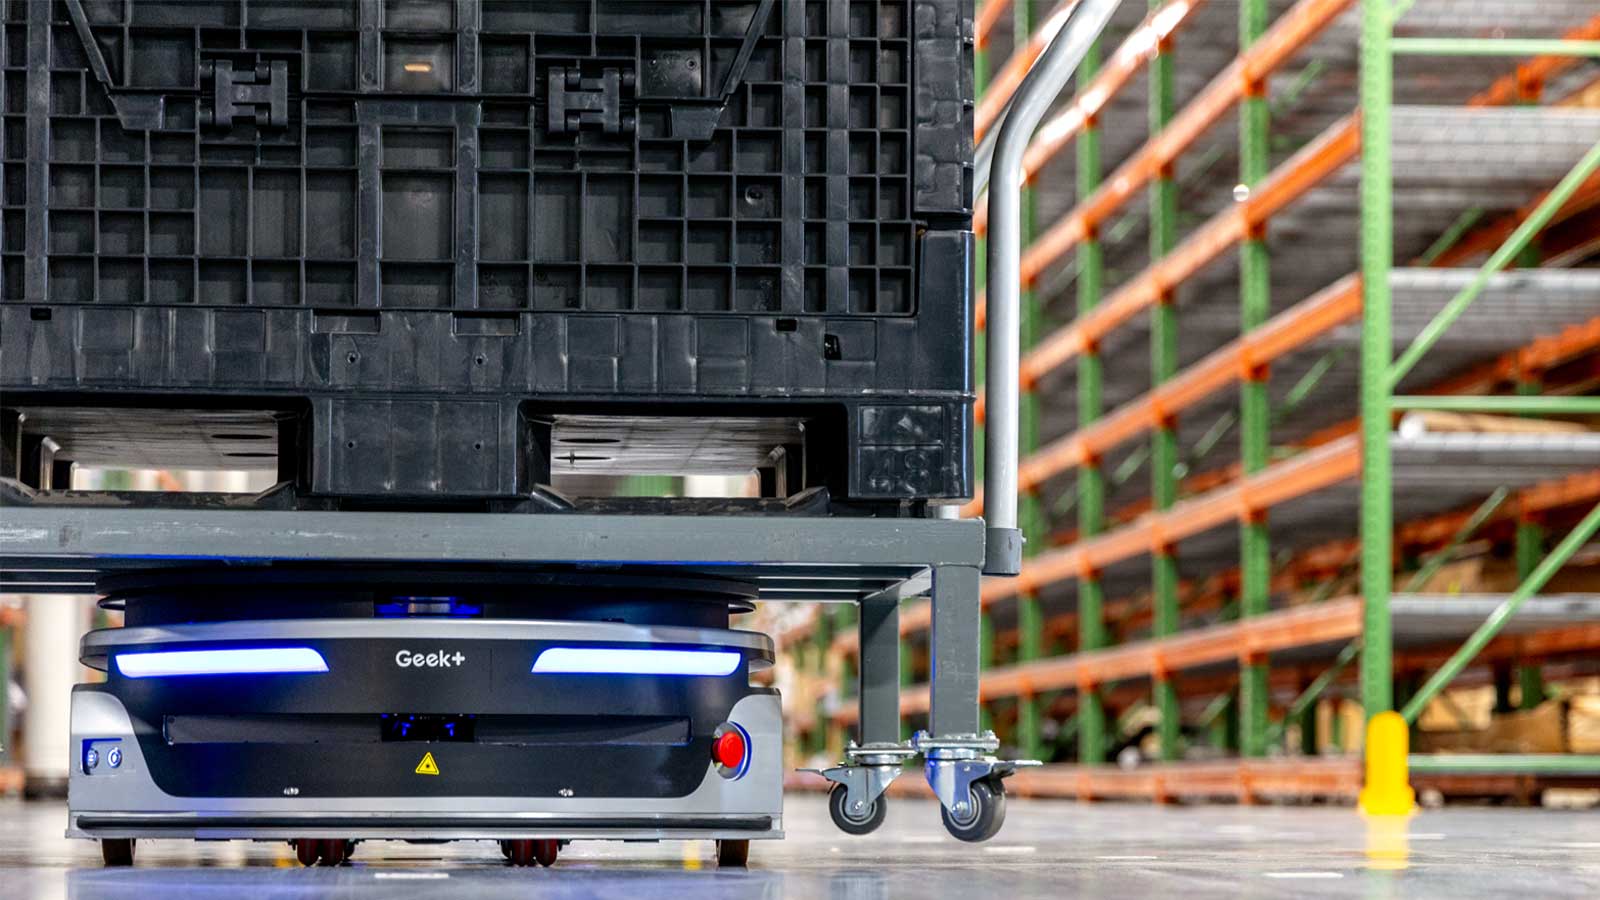 Autonomous Mobile Robot (AMR) transporting inventory in distribution center